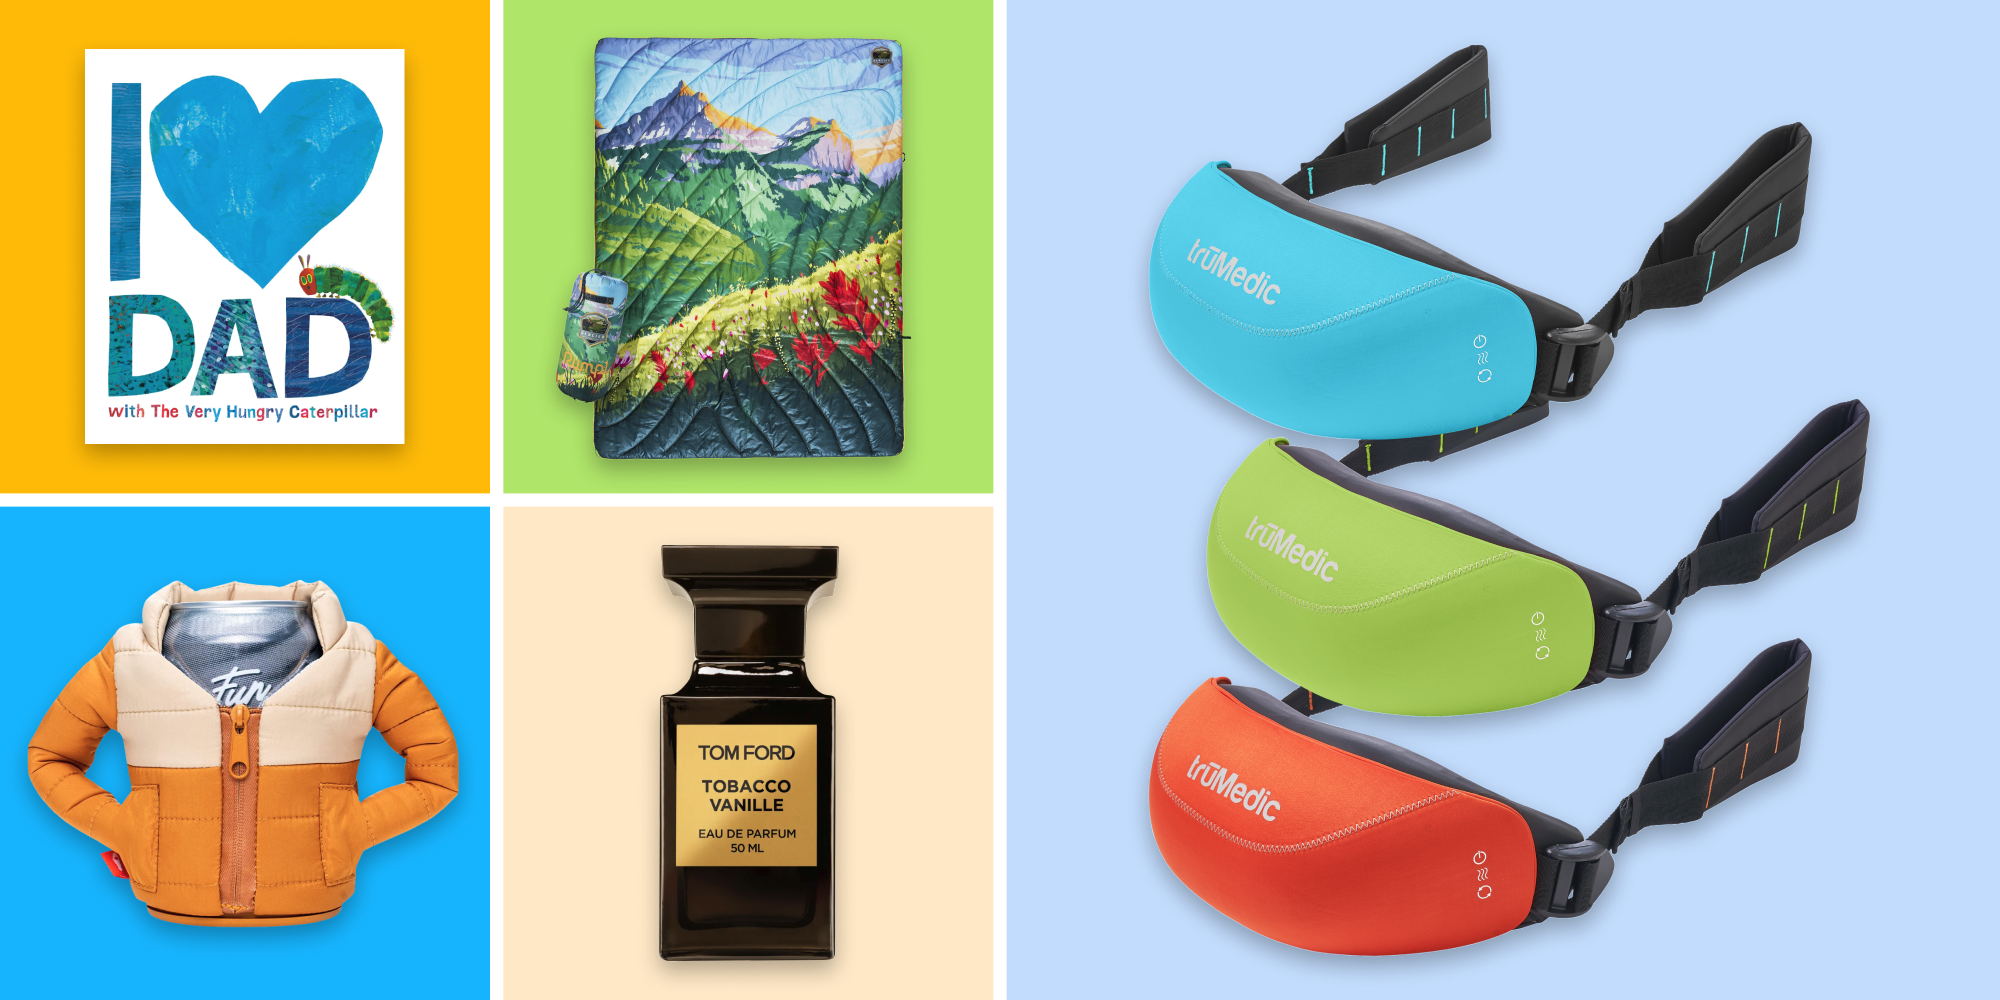 Last Minute Father's Day Gift Ideas...that DAD will LOVE!